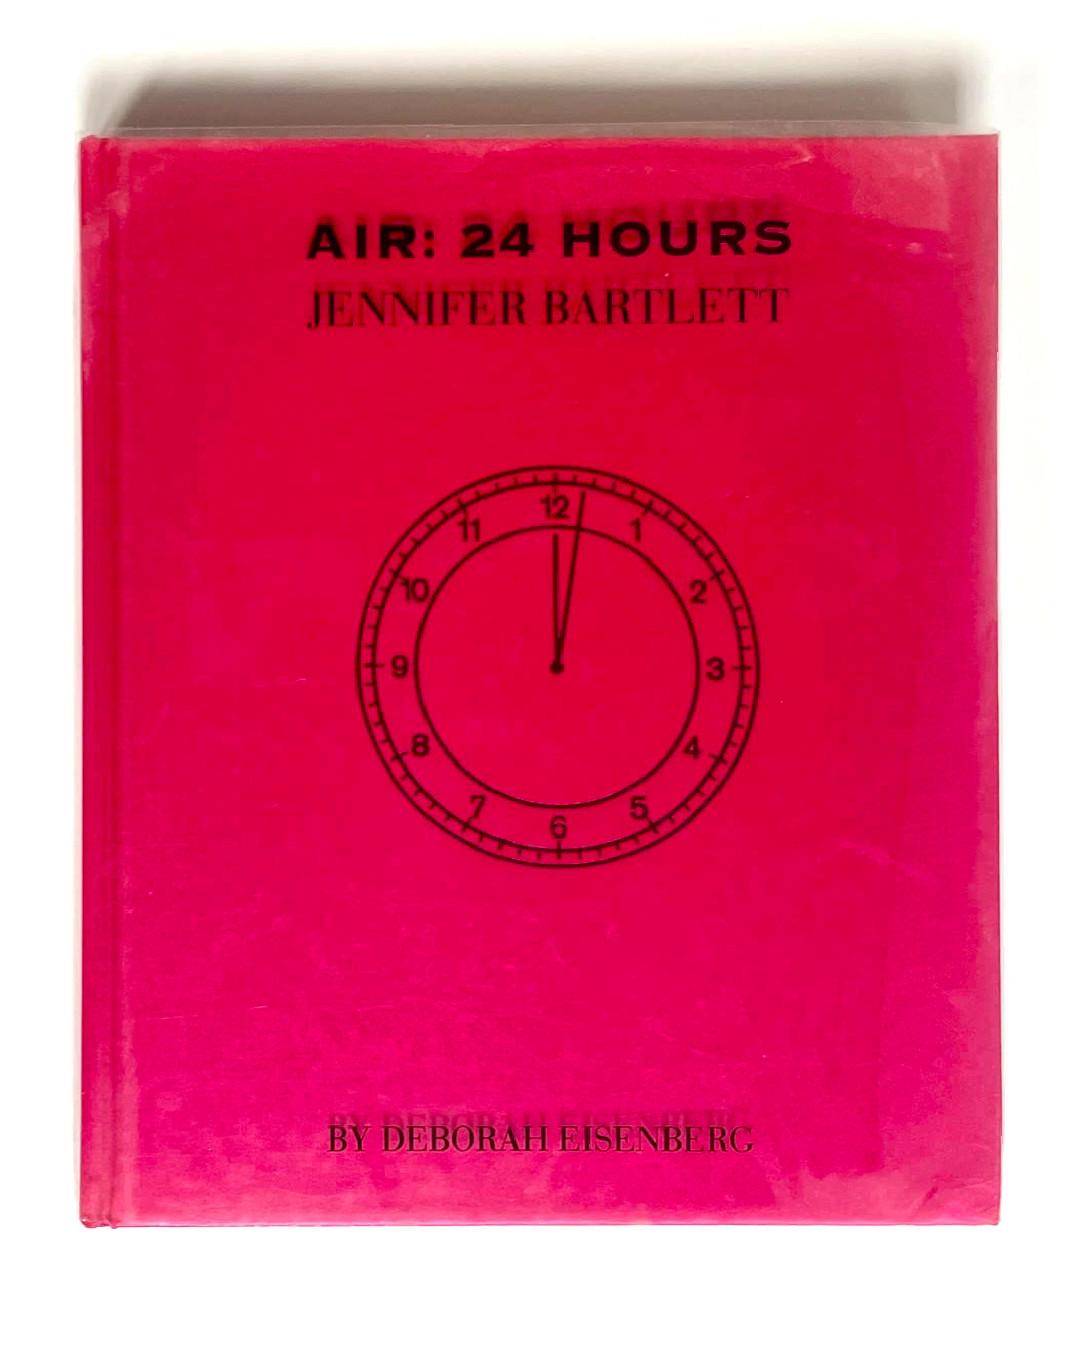 Jennifer Losch Bartlett
Air: 24 Hours, 1994
Hardback monograph (book) bound in the publisher's original pink satin cloth with the covers and spine stamped in black. In publisher's original acetate dust jacket.
Hand signed and inscribed by the artist